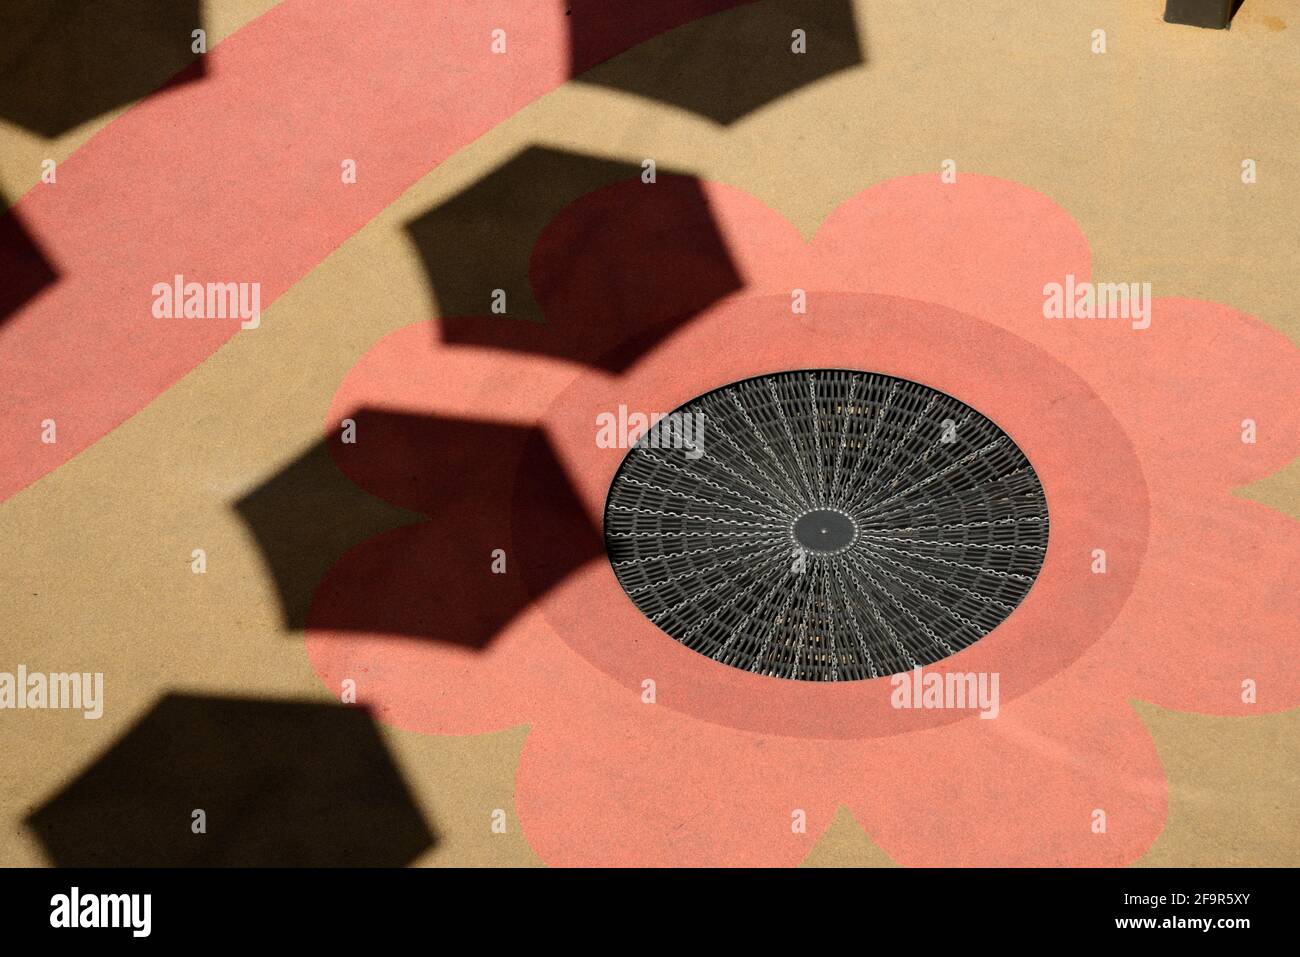 Abstract Street Patterns on Pavement with Decorated Sewer Cover, Manhole Cover or Drain Cover Disguised as Pink Flower & Shadows of Parasols France Stock Photo